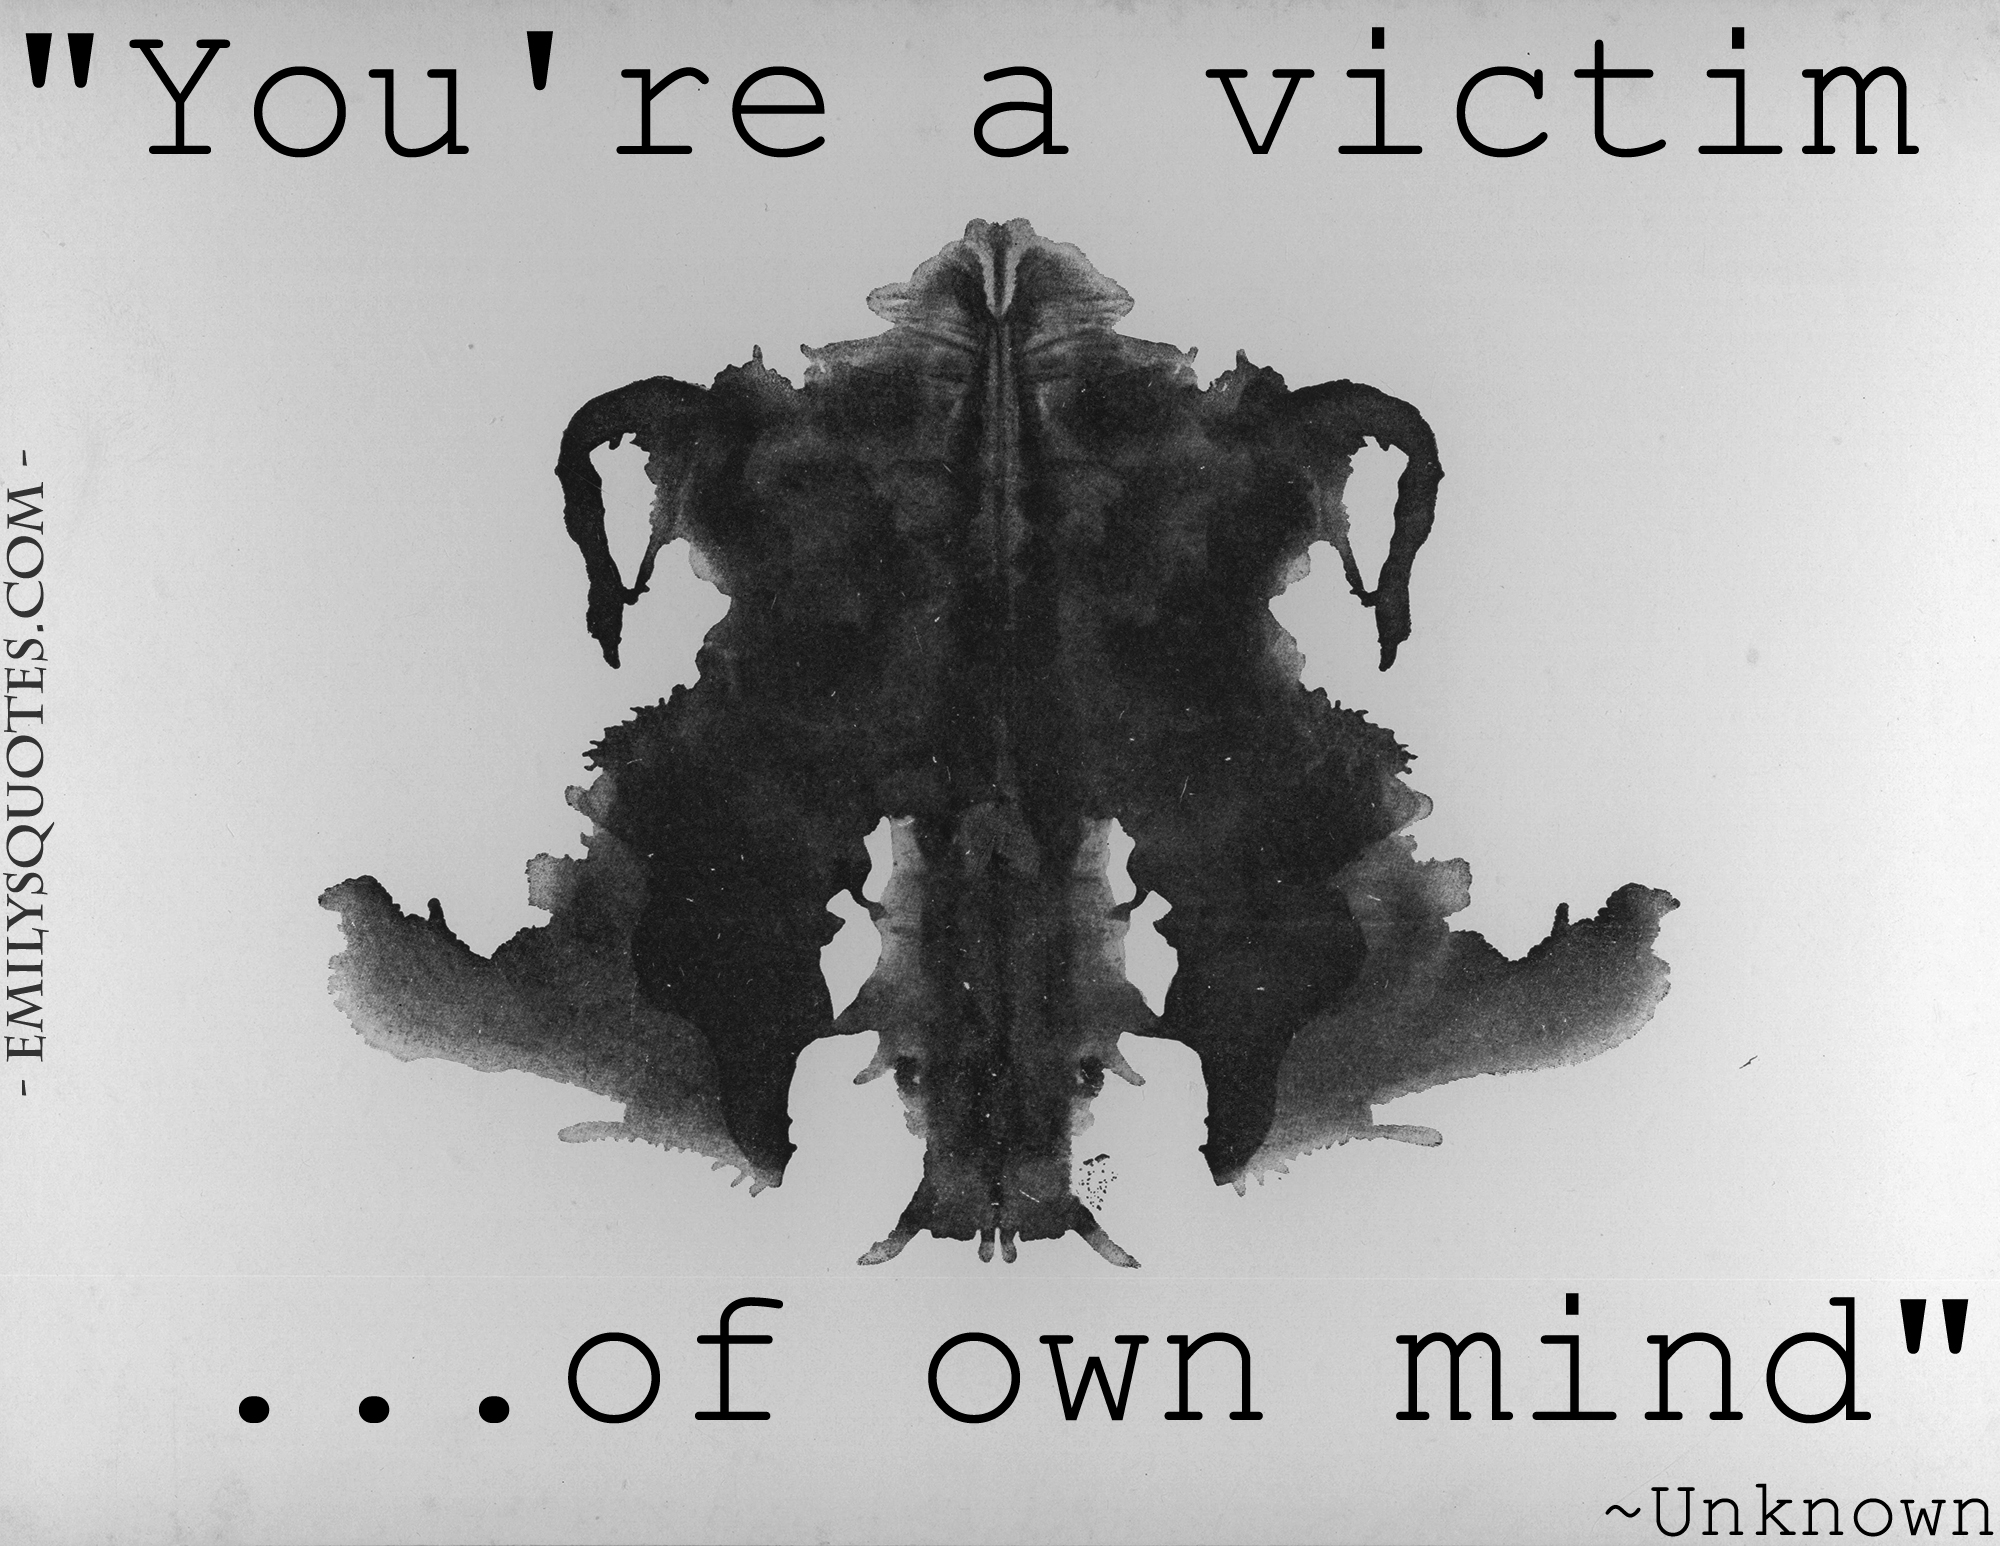 You’re a victim of own mind